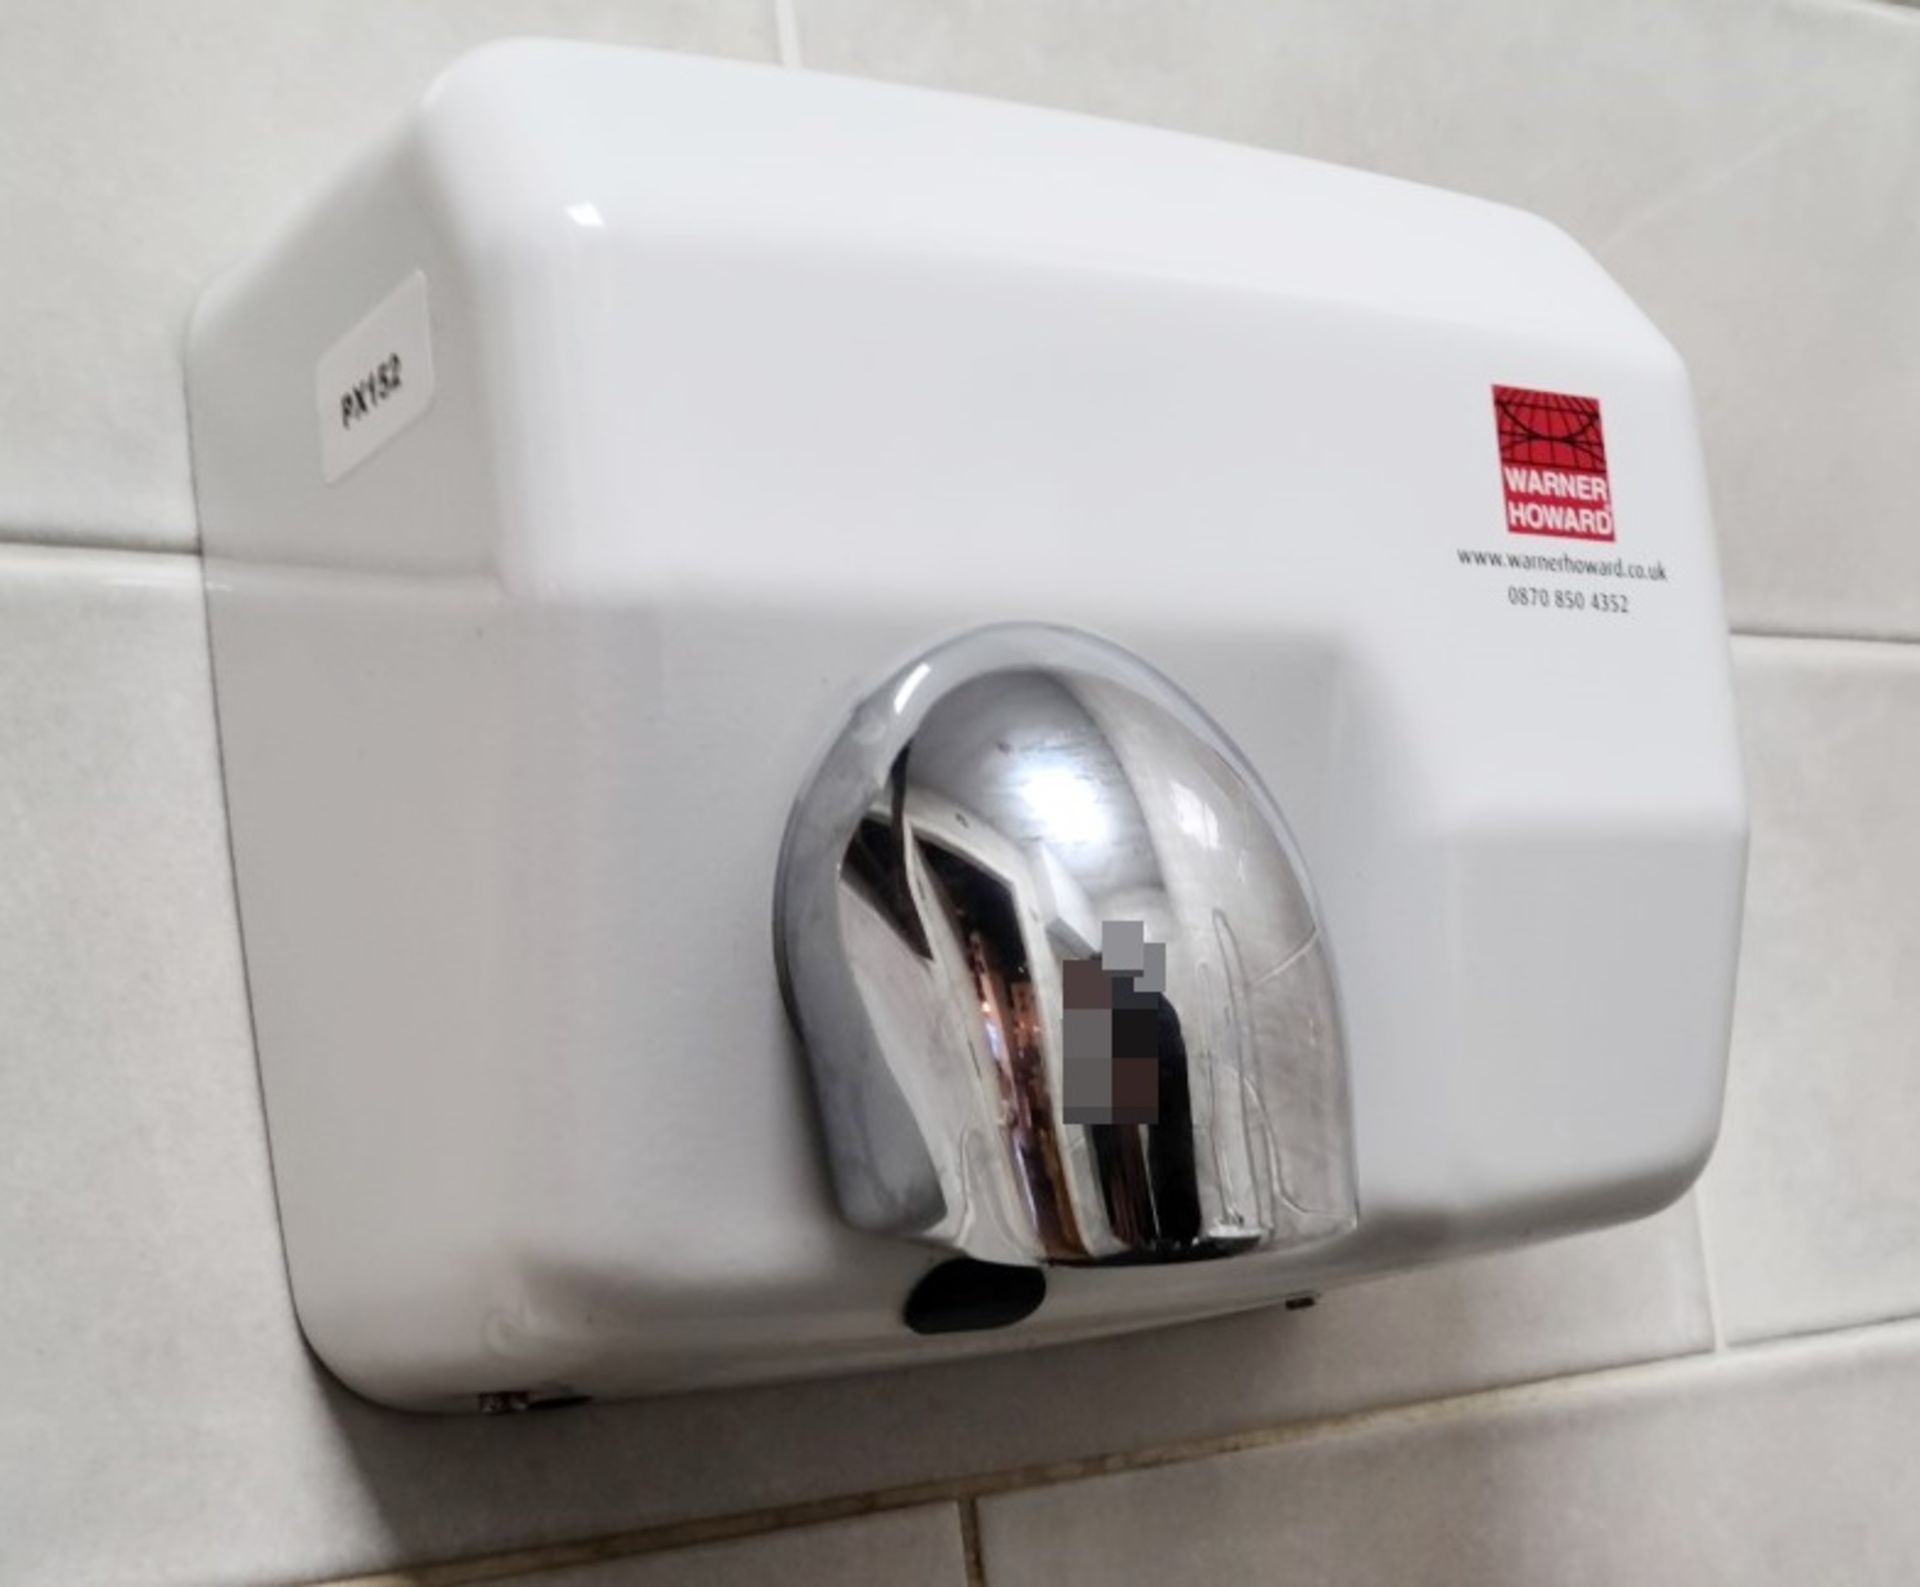 1 x WARNER HOWARD High Performance Hand Dryer 360 Degree Swivel Nozzle For Public Areas - Image 4 of 4